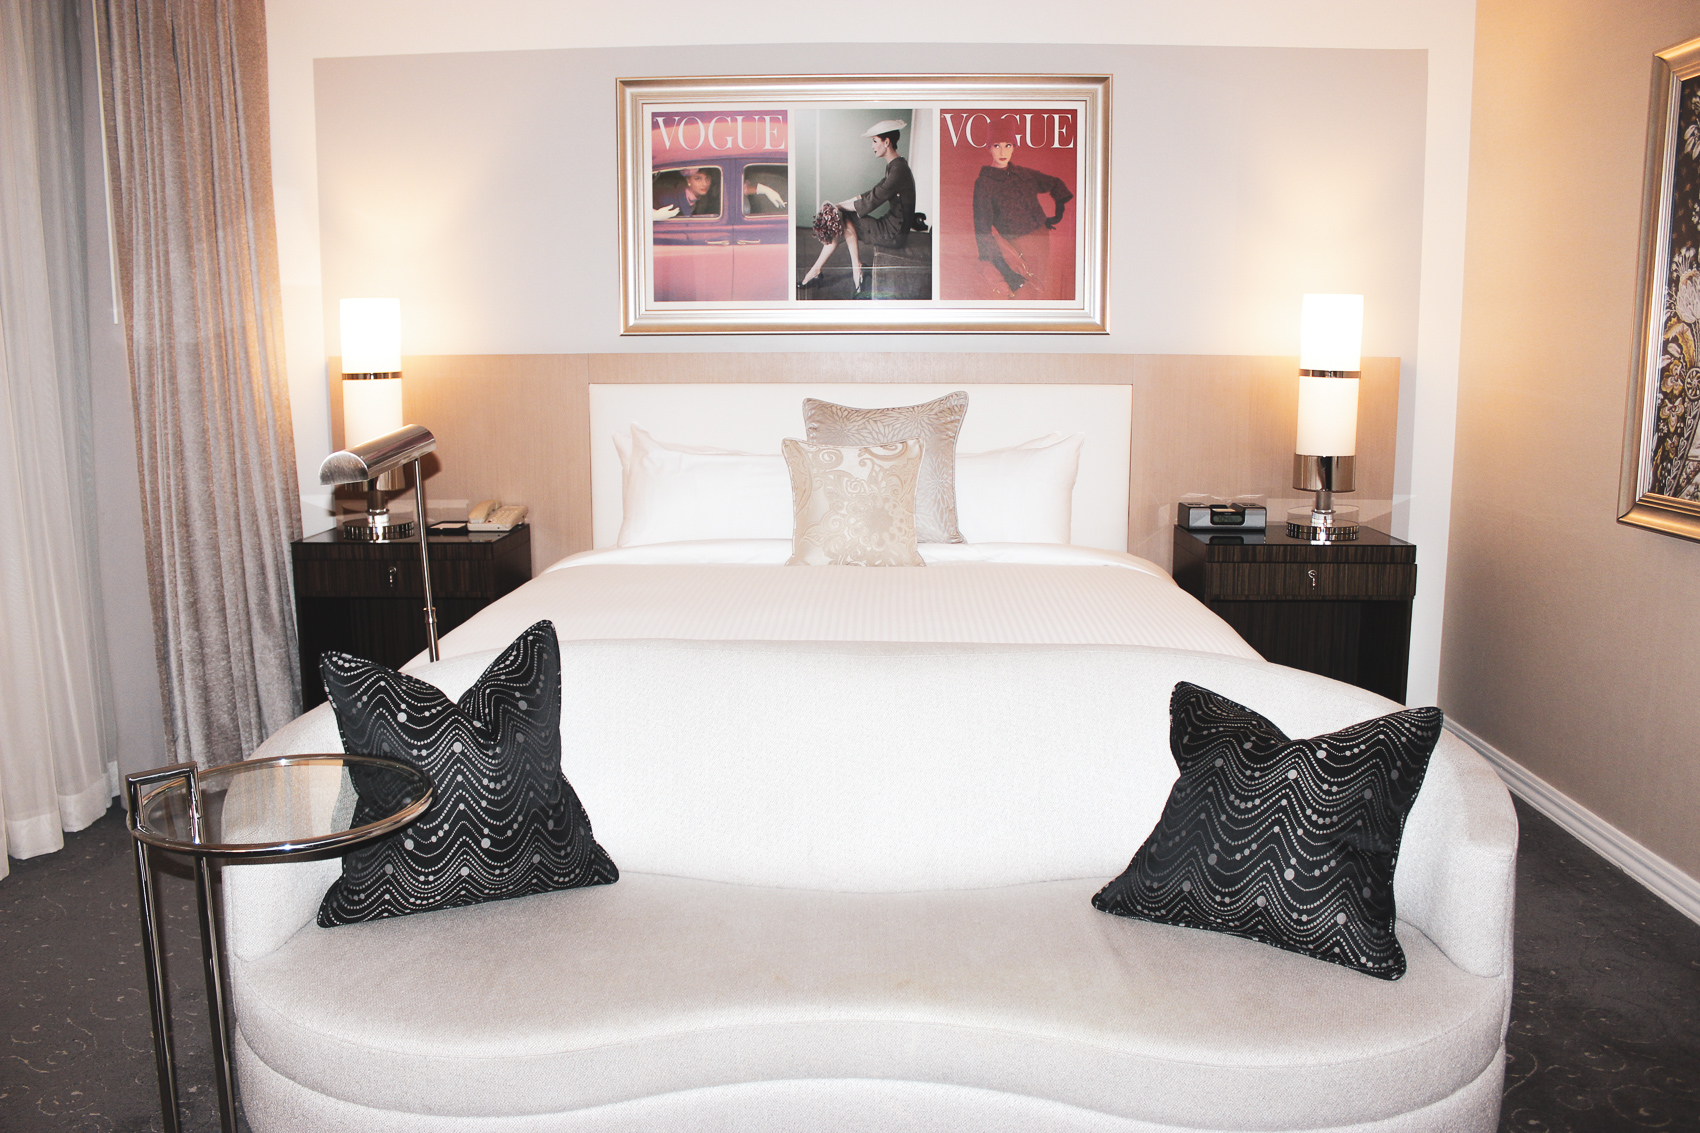 Lowes Vogue Hotel Montreal Review (1)